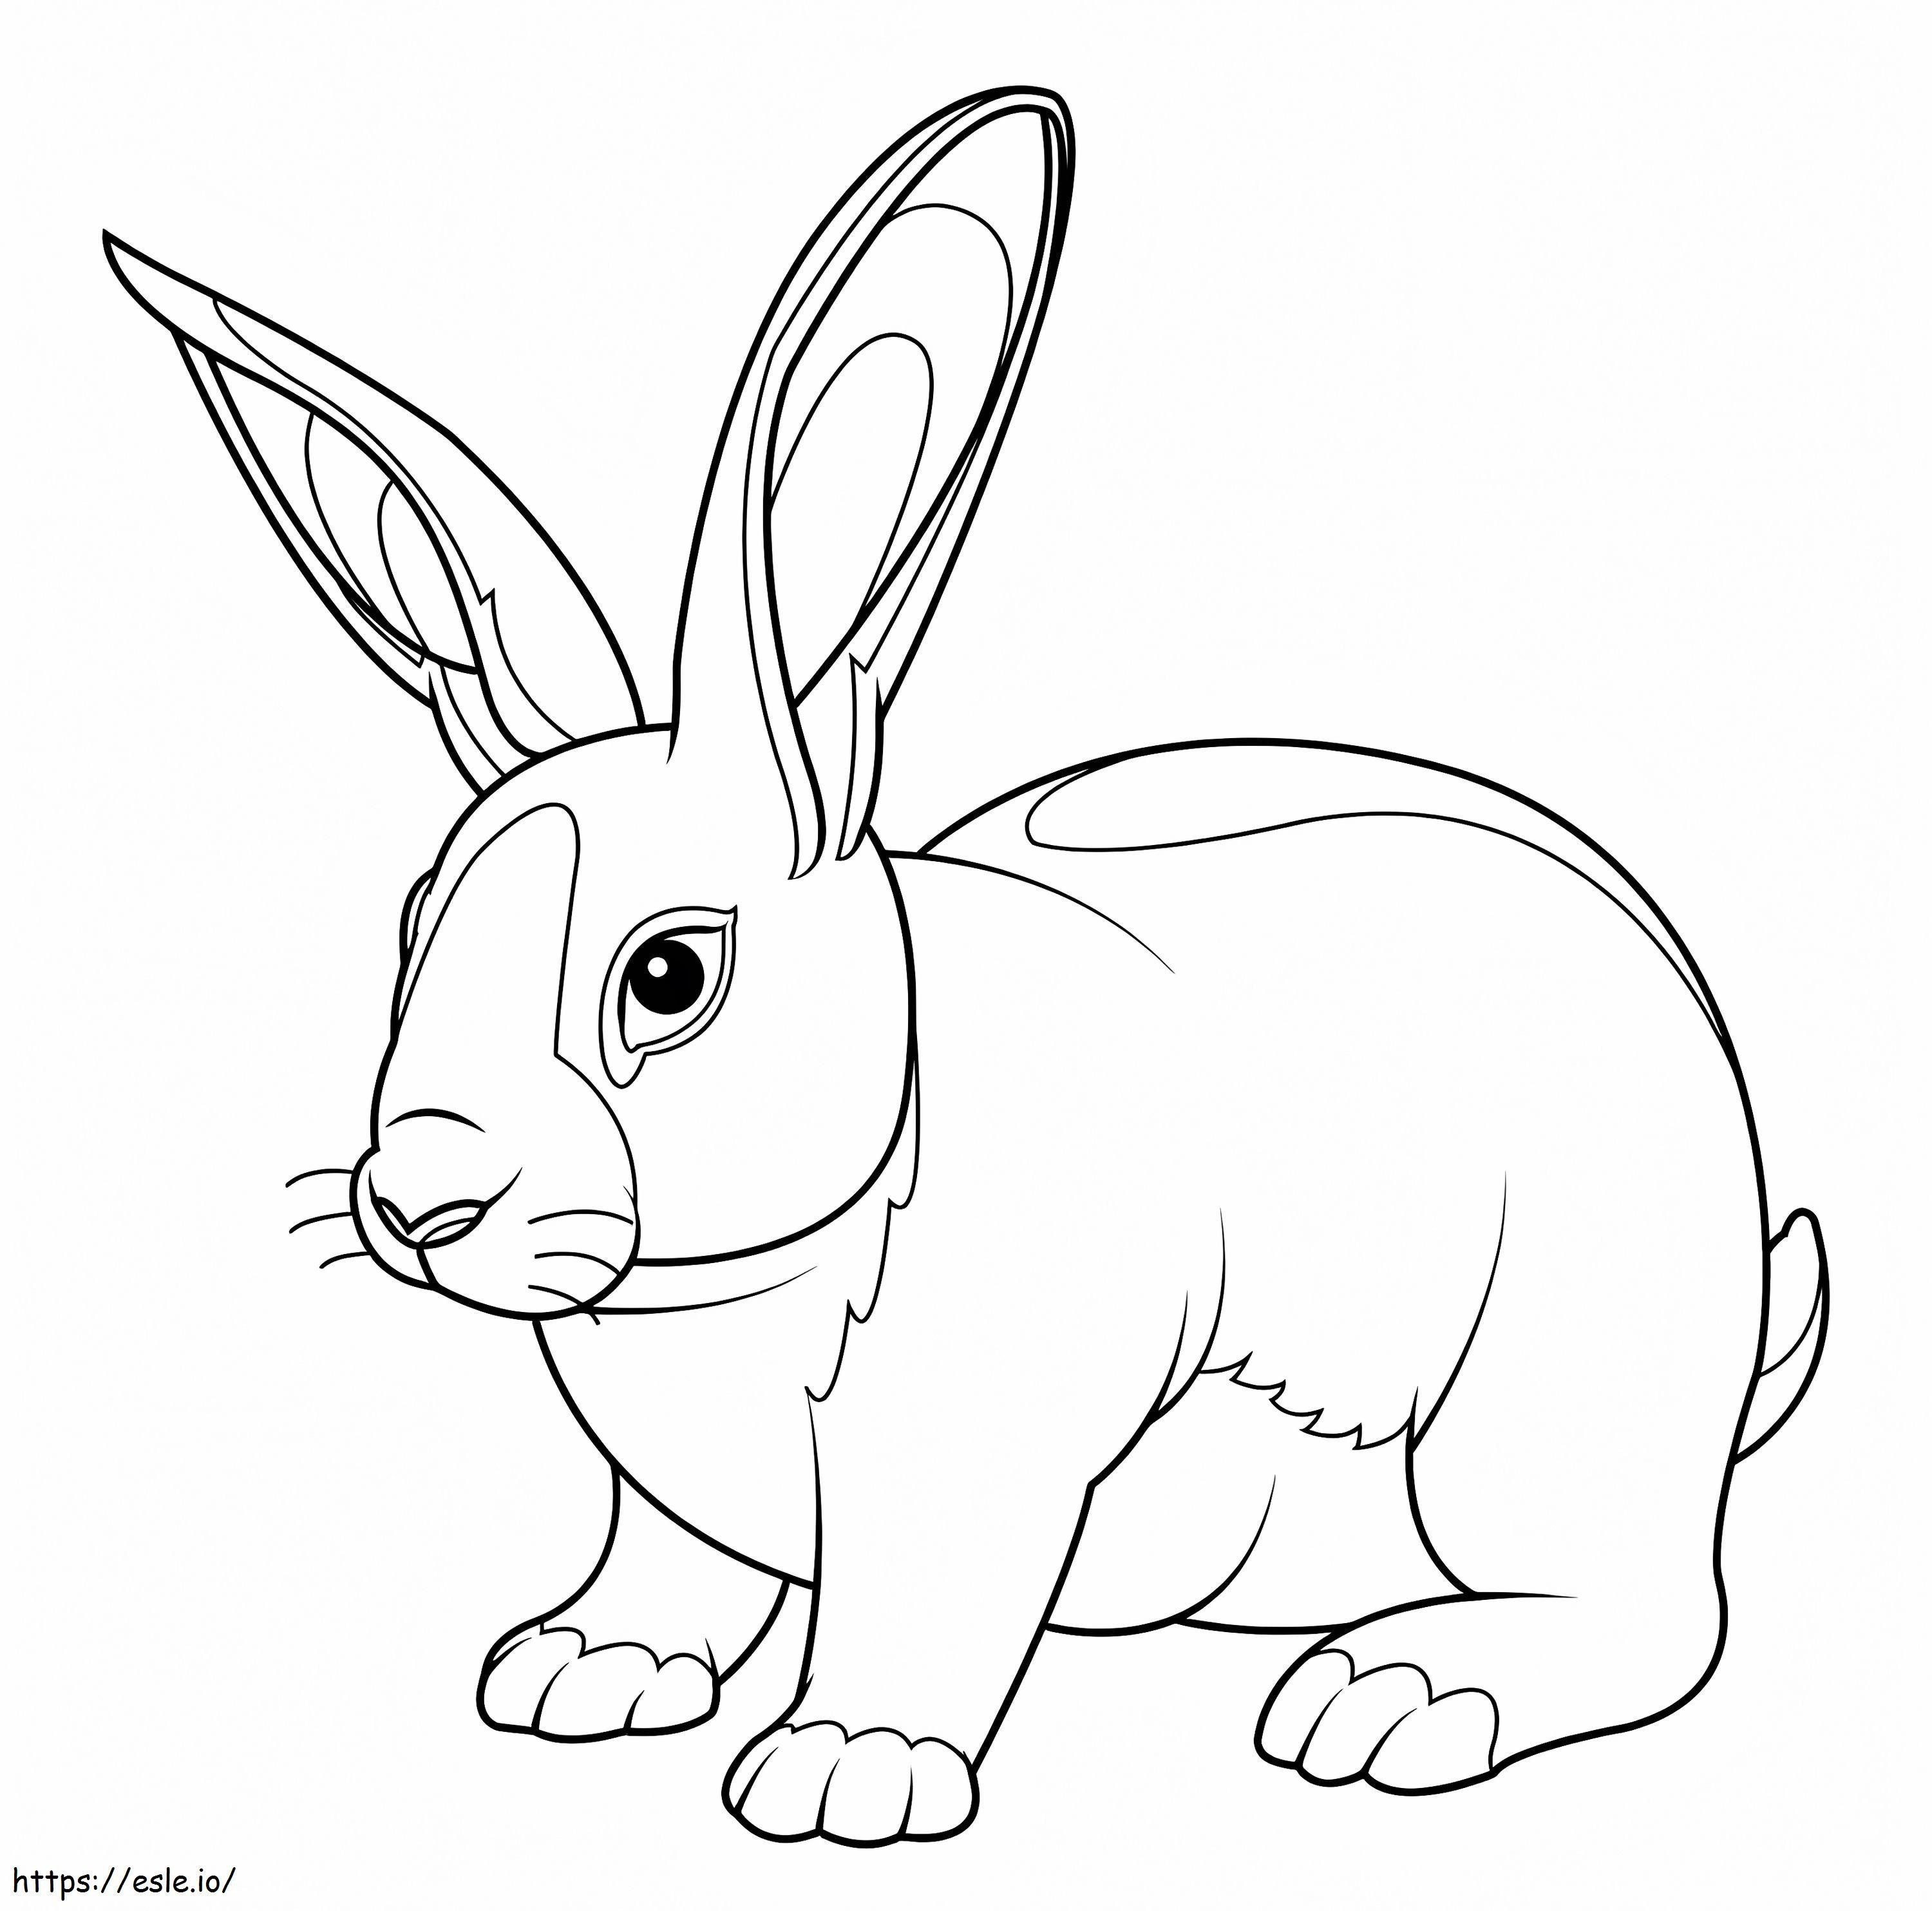 Normal Rabbit coloring page